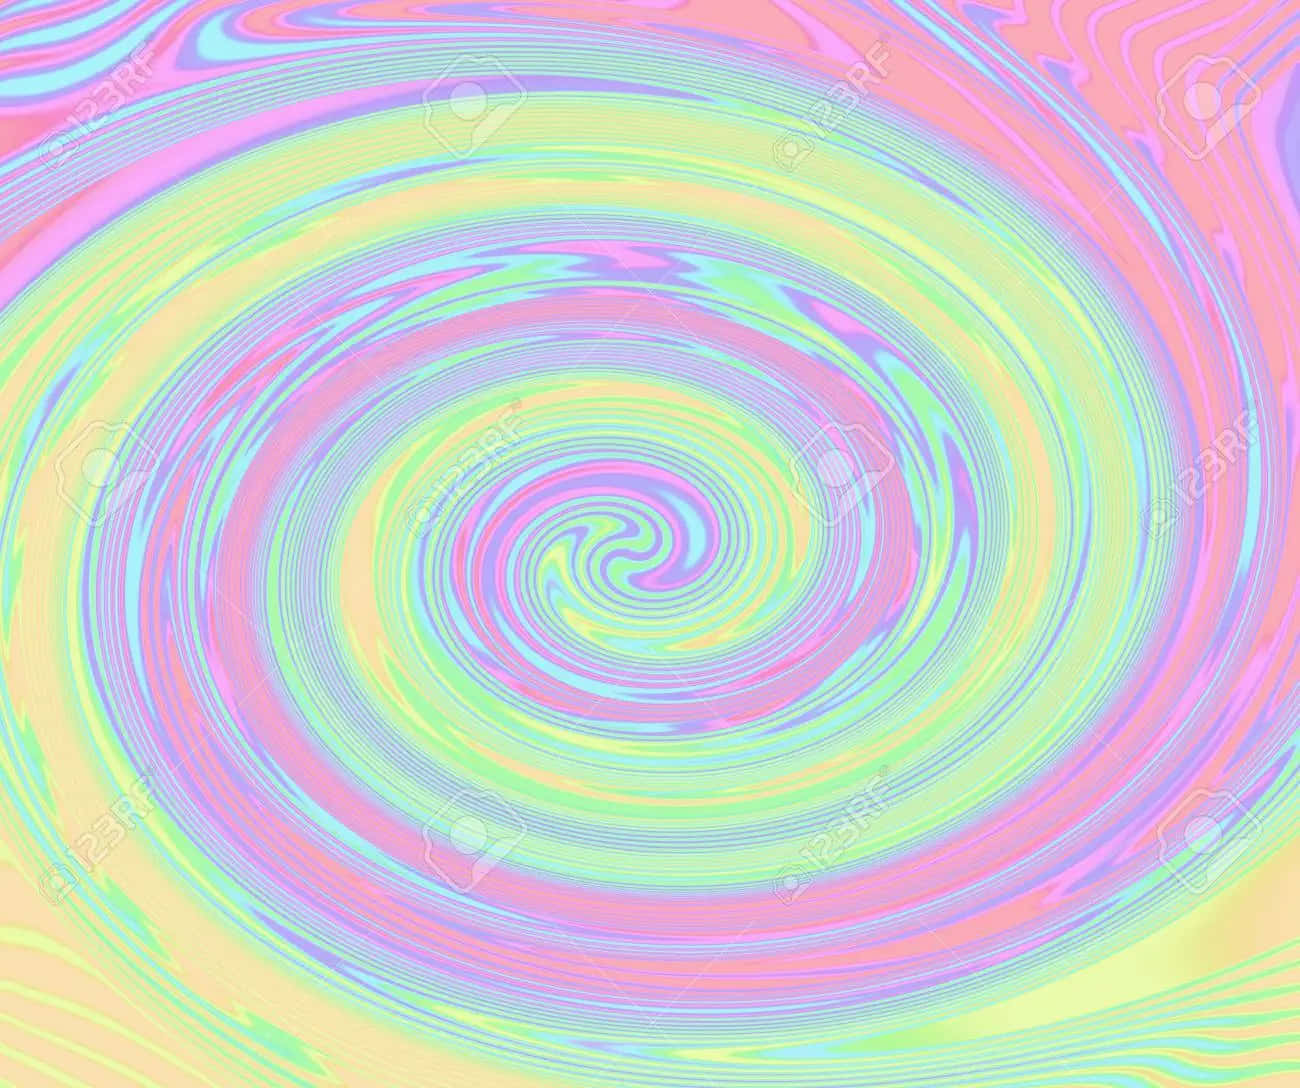 90s Style Colorful Swirl Wallpaper